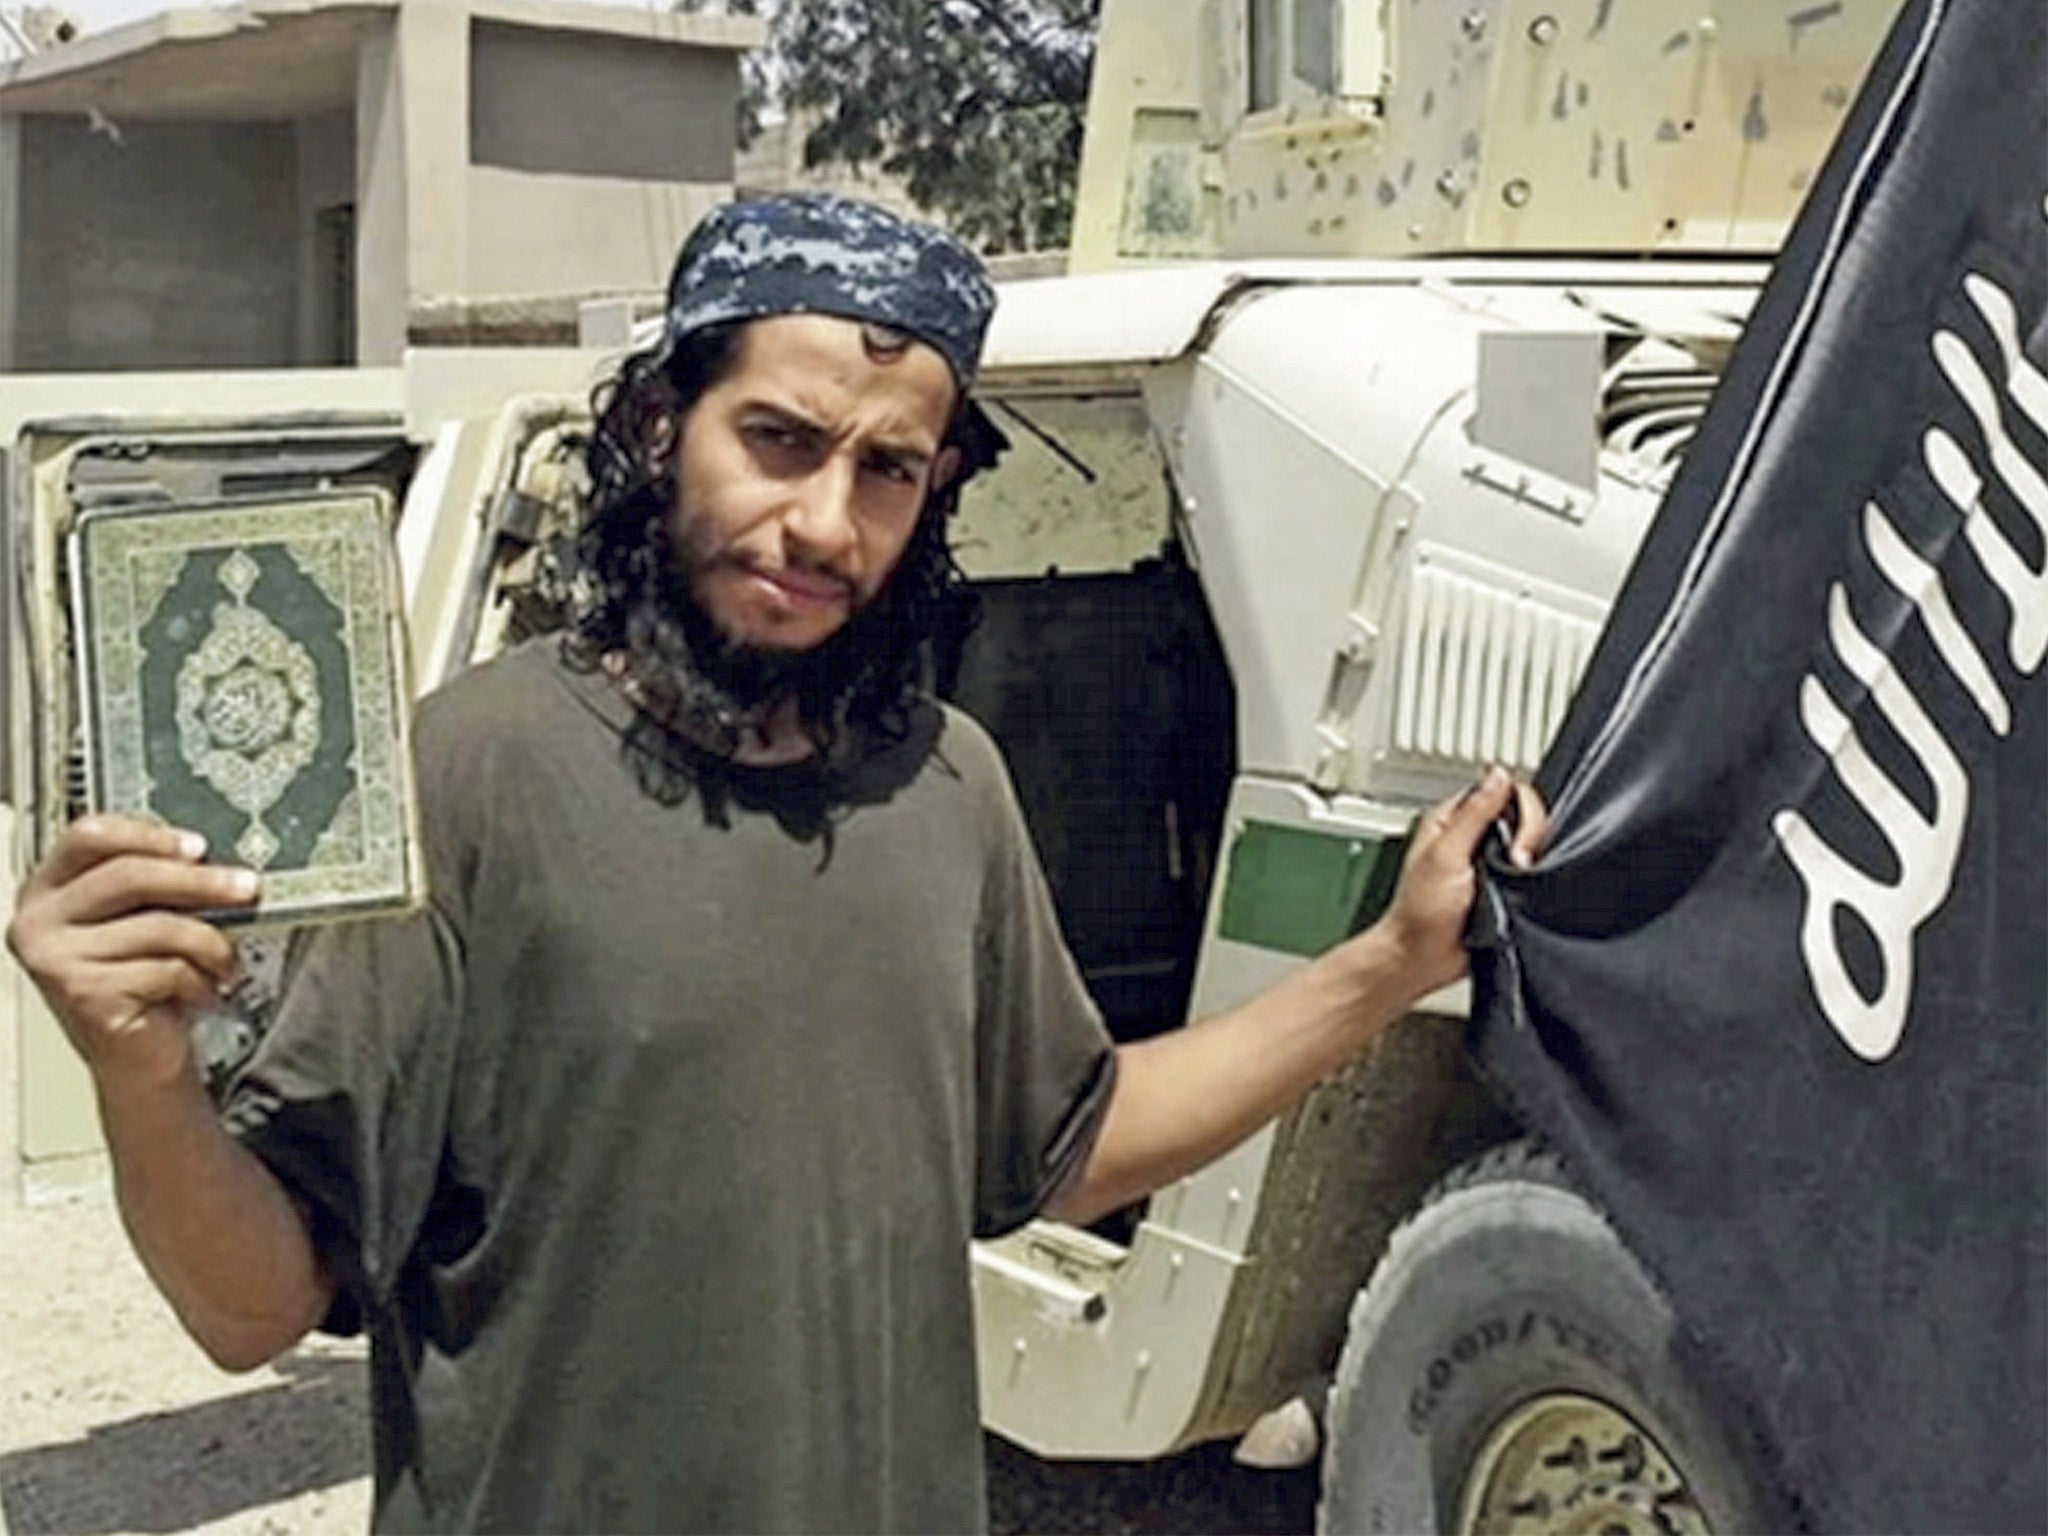 Abdelhamid Abaaoud, believed to be the mastermind behind the attacks last week